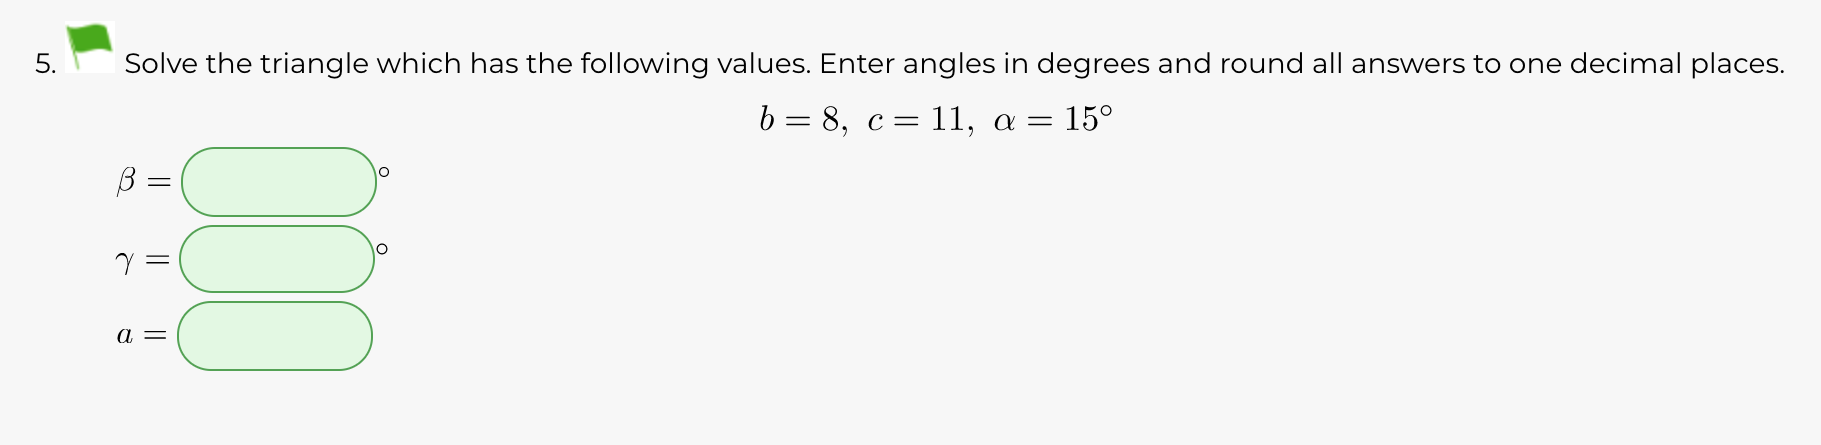 Solve the triangle which has the following values. Enter angles in degrees and round all answers to one decimal places.
b = 8, c= 11, a =
5.
|| ||||
